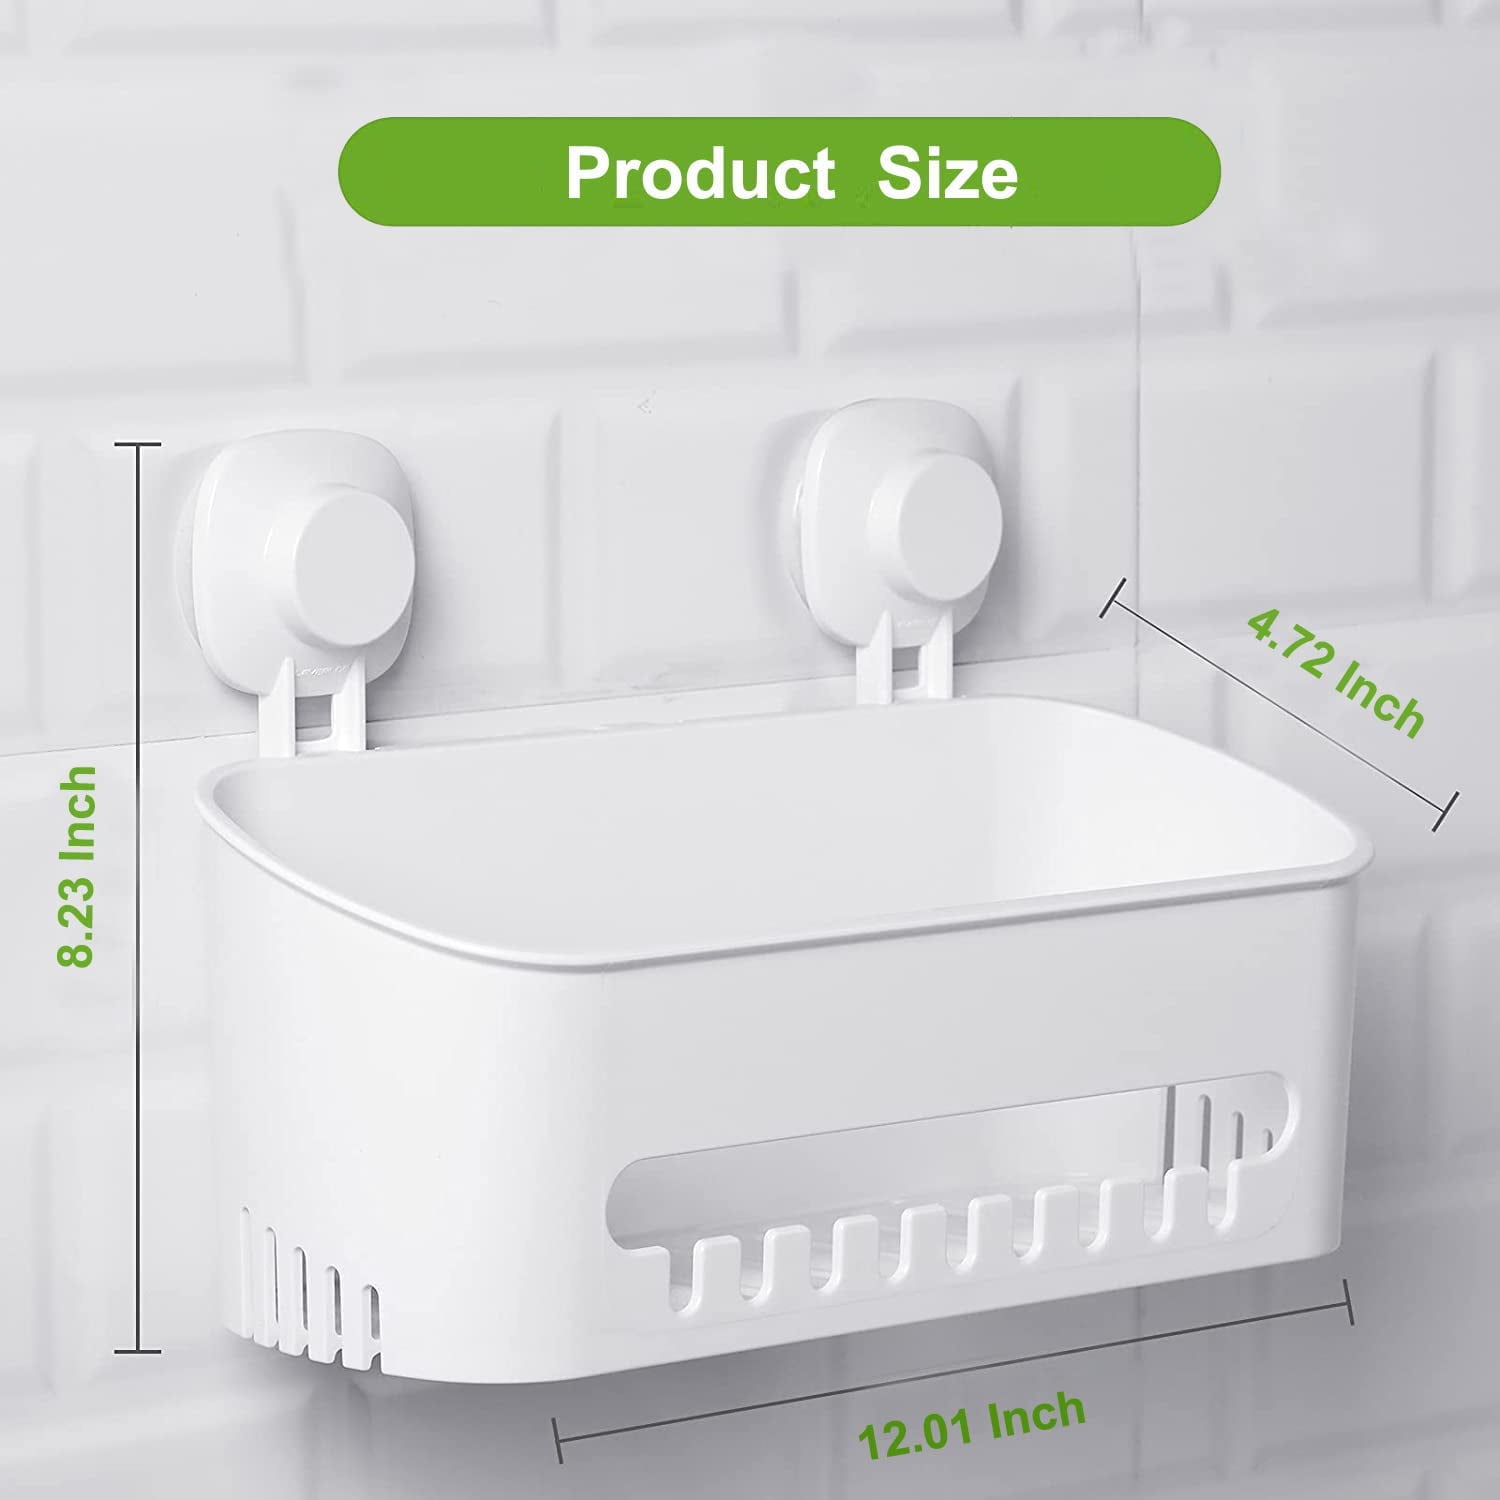 Corner Shower Caddy (Suction Cup No-Drilling) holds 10kg – TBM